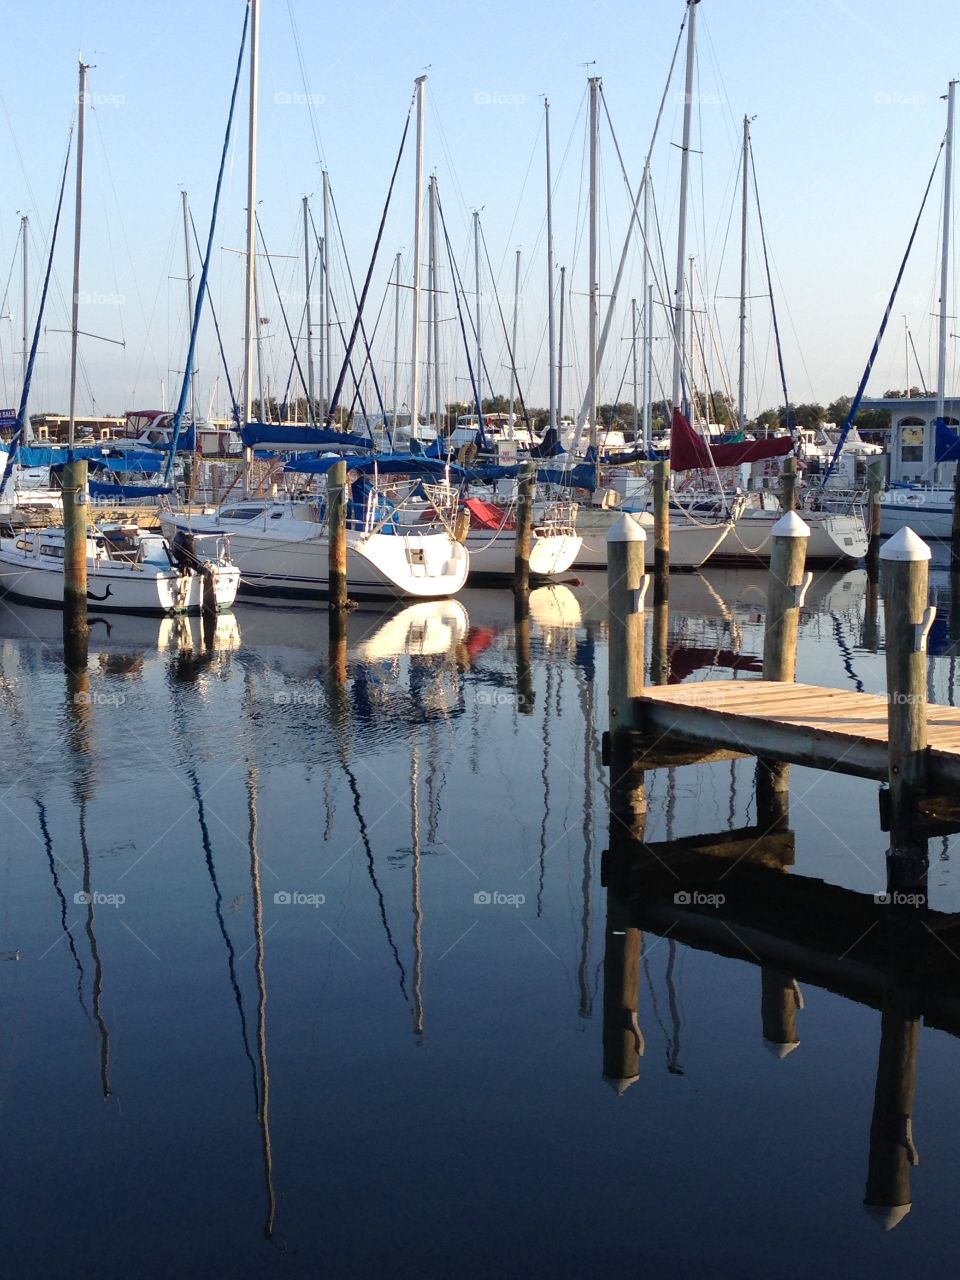 Reflection of boats and dock on the water at a marina